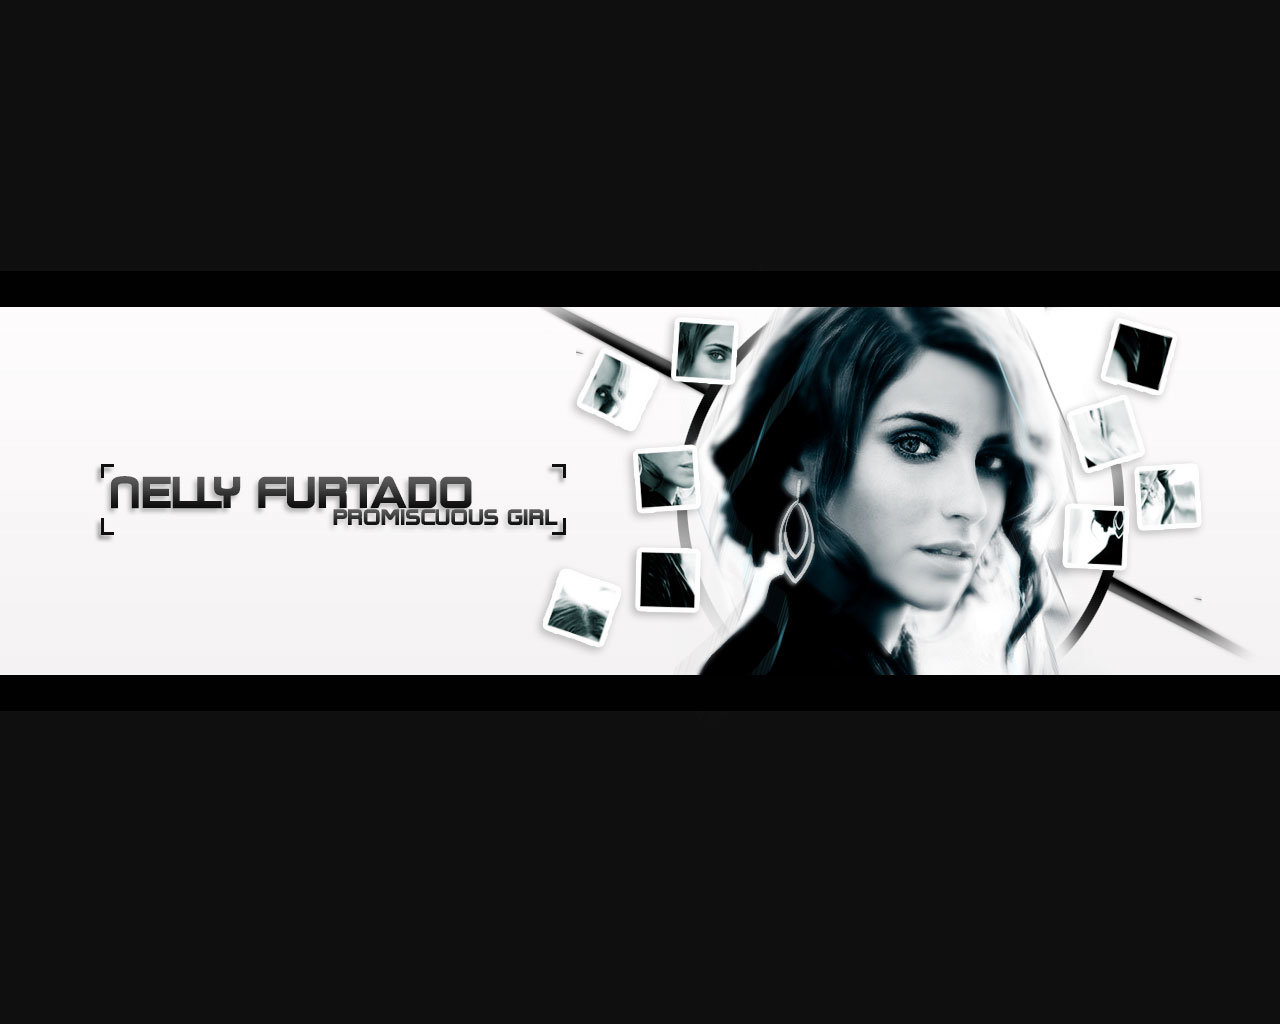 Download hd 1280x1024 Nelly Furtado PC background ID:62292 for free